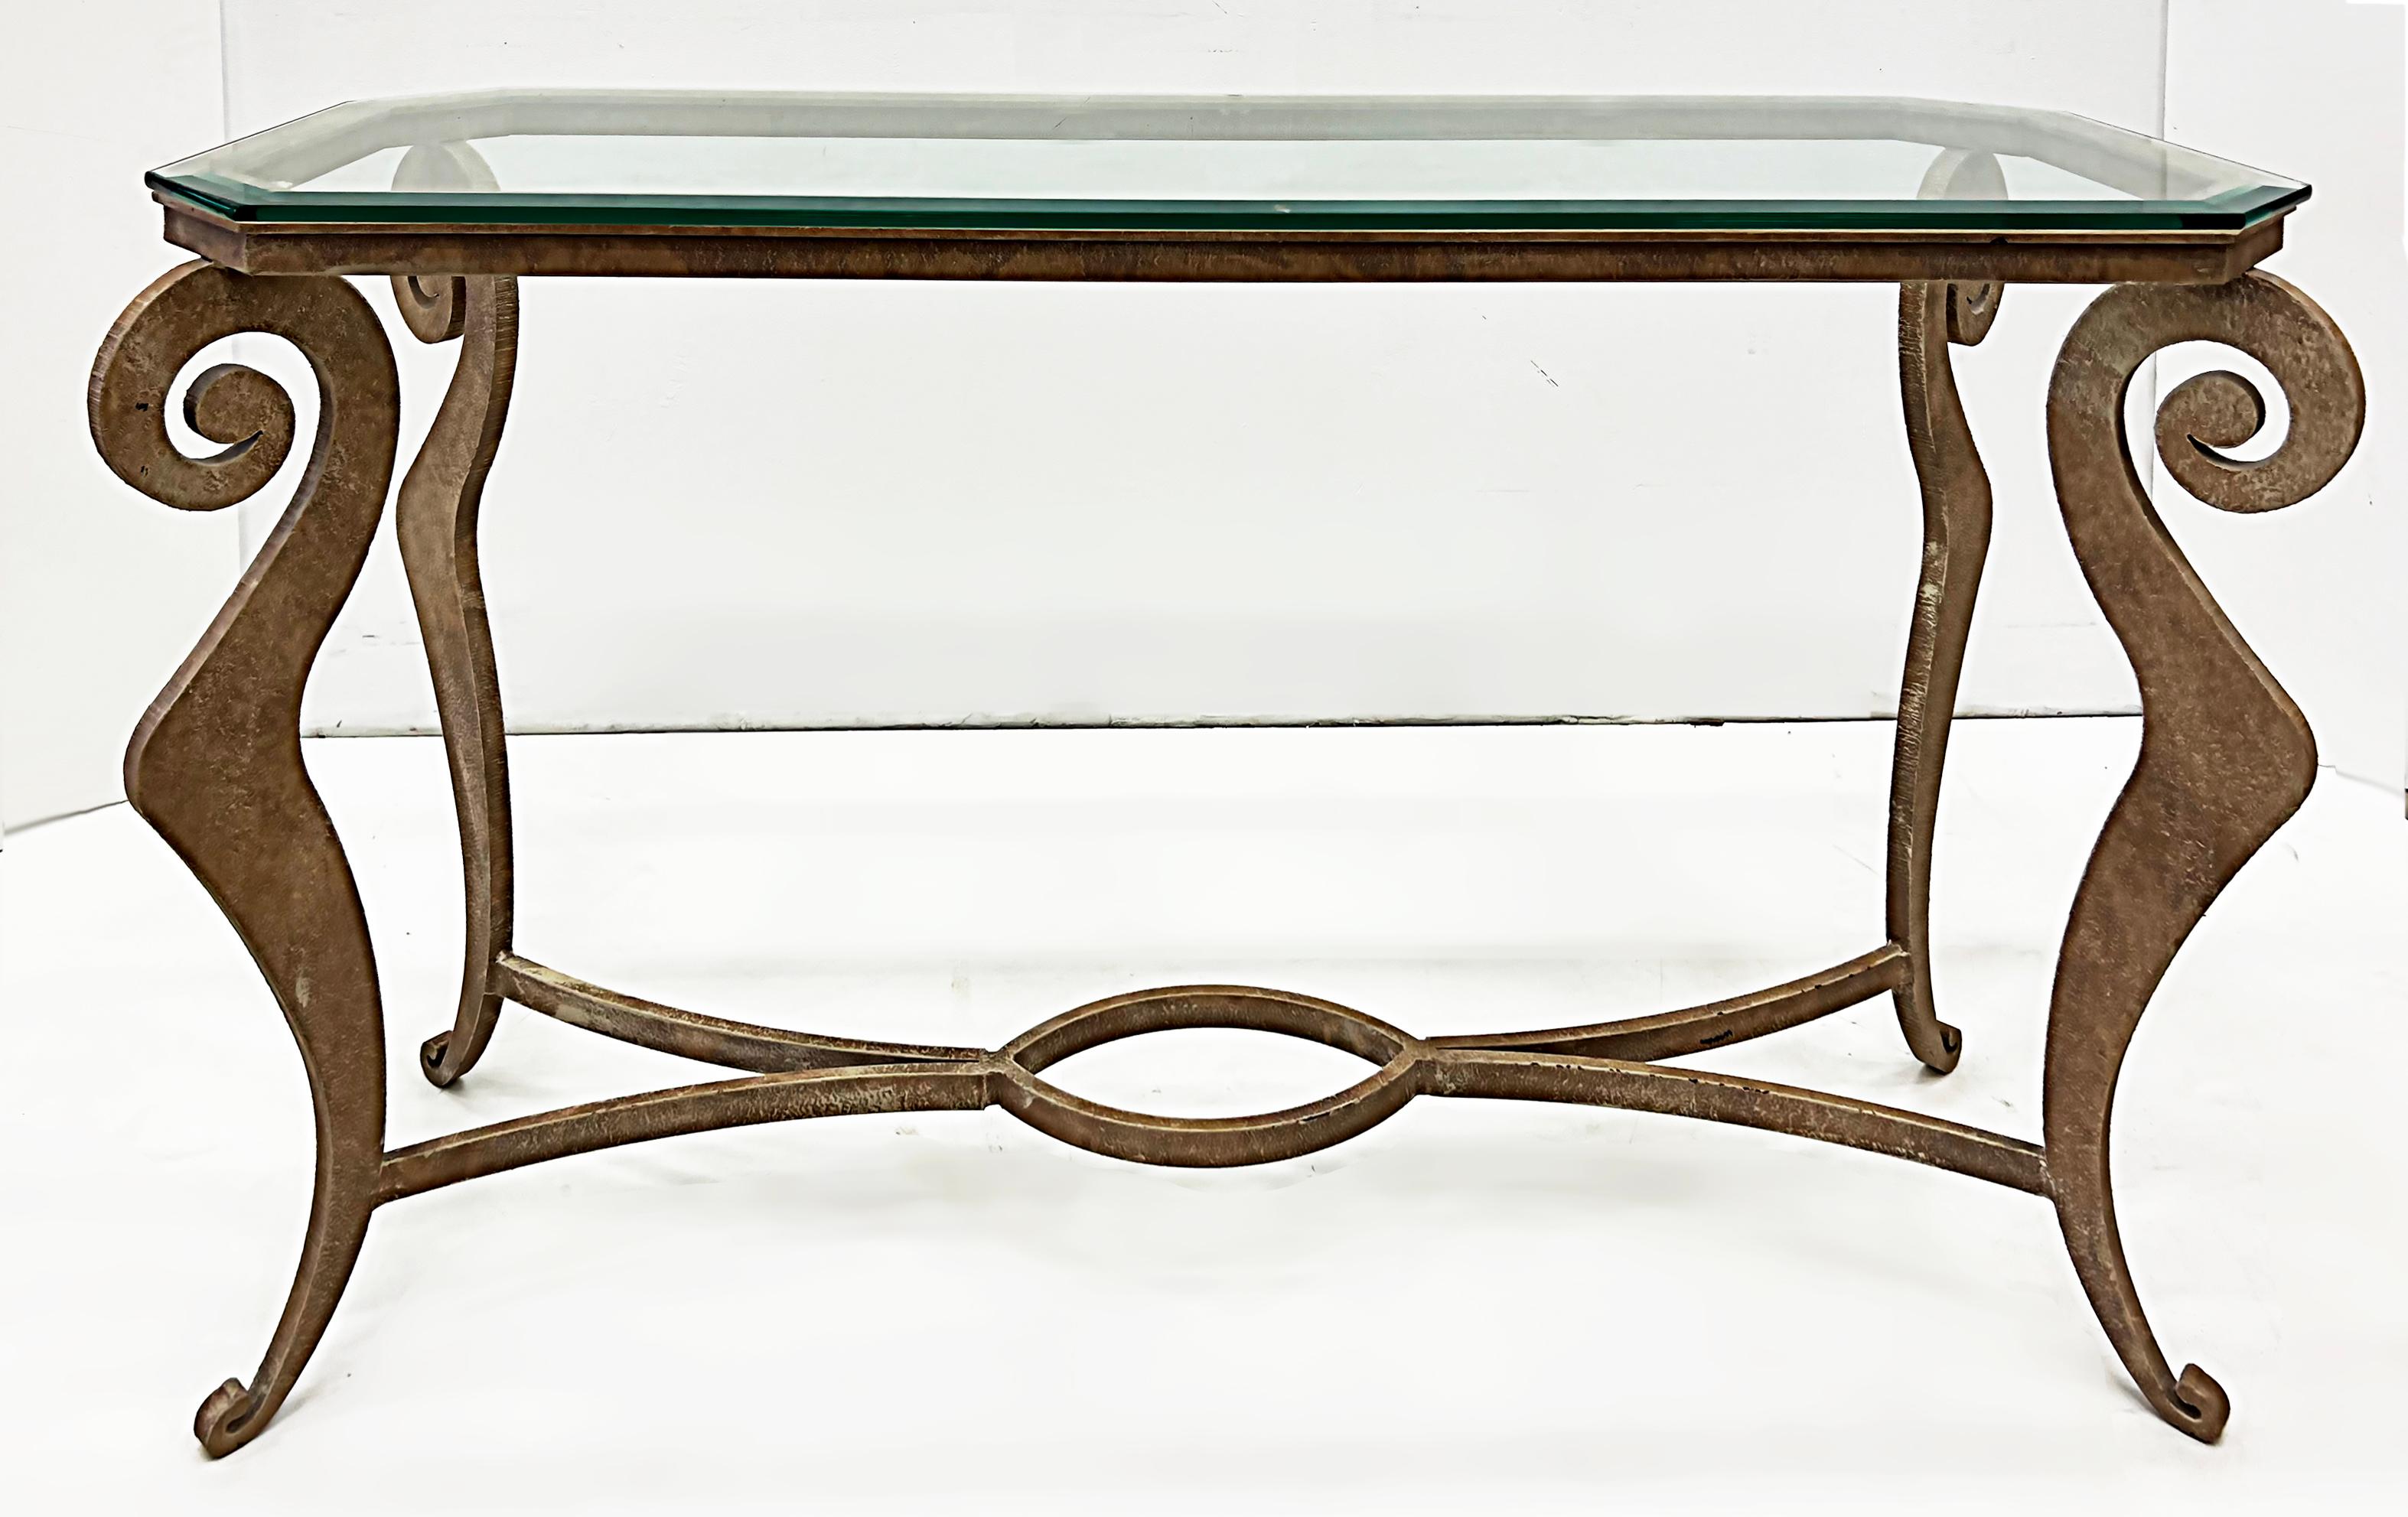 1990s Donghia Style Steel Cut Stylized Console Table with Glass Top

Offered for sale is a very substantial stylized vintage 1990s Donghia style cut steel console with a fitted beveled glass top. The frame is well made with very thick and heavy